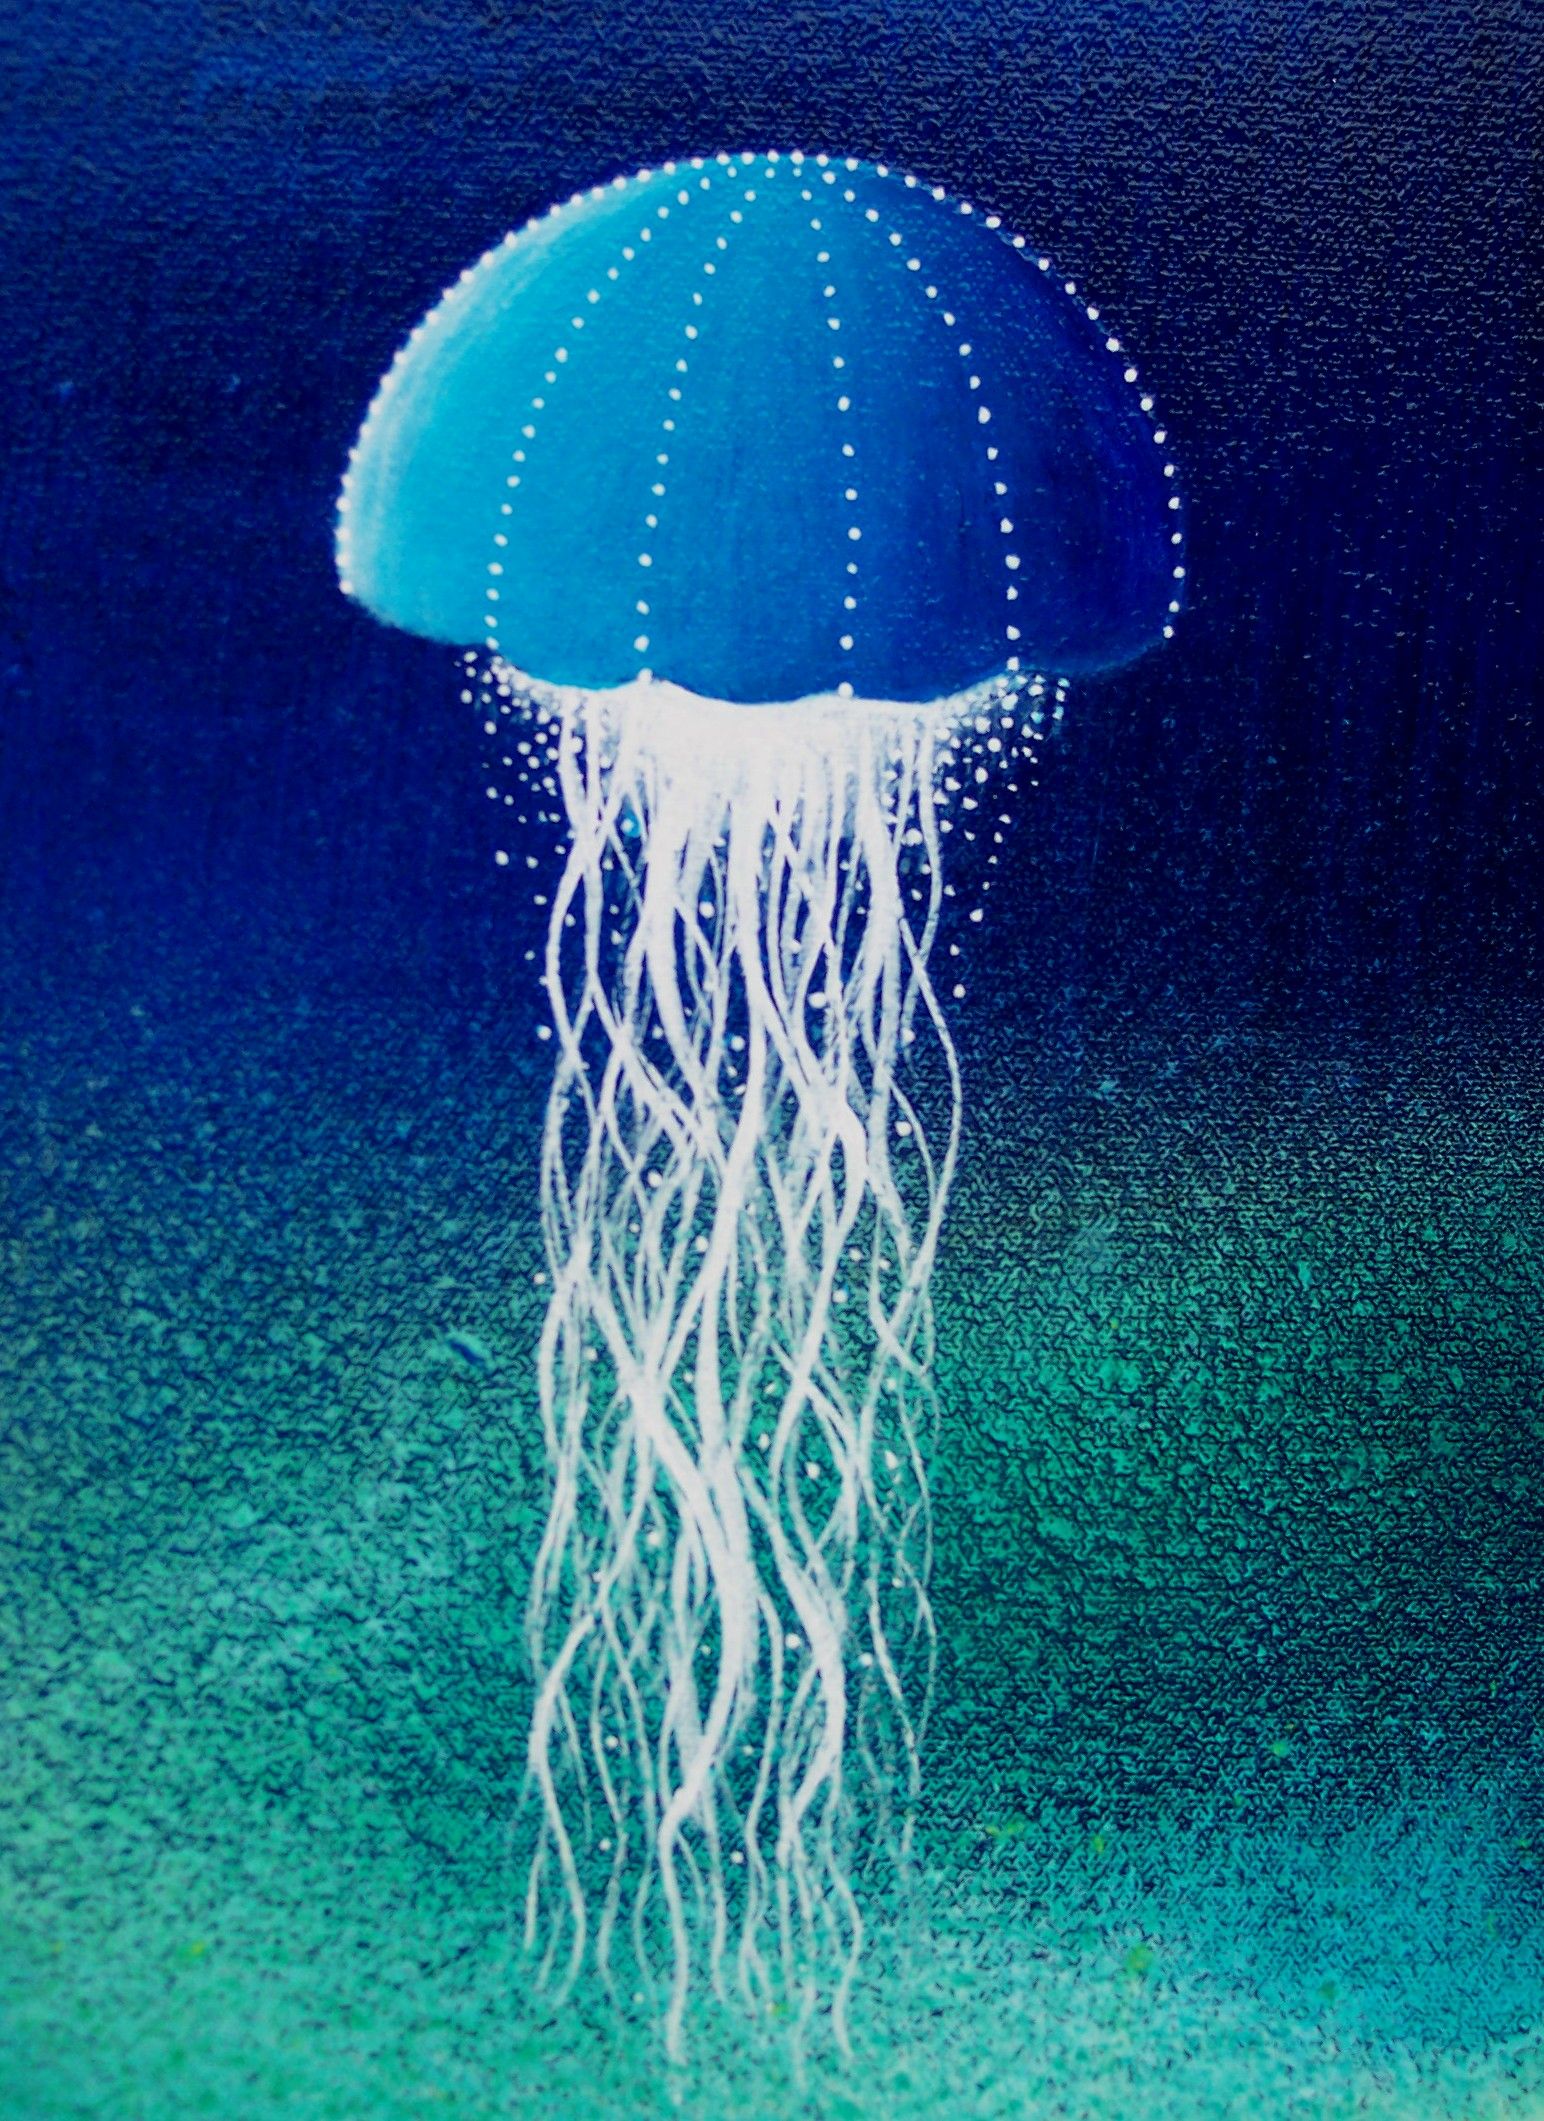 Creatures of the deep | Jellyfish, Jelly fish and Blue angels